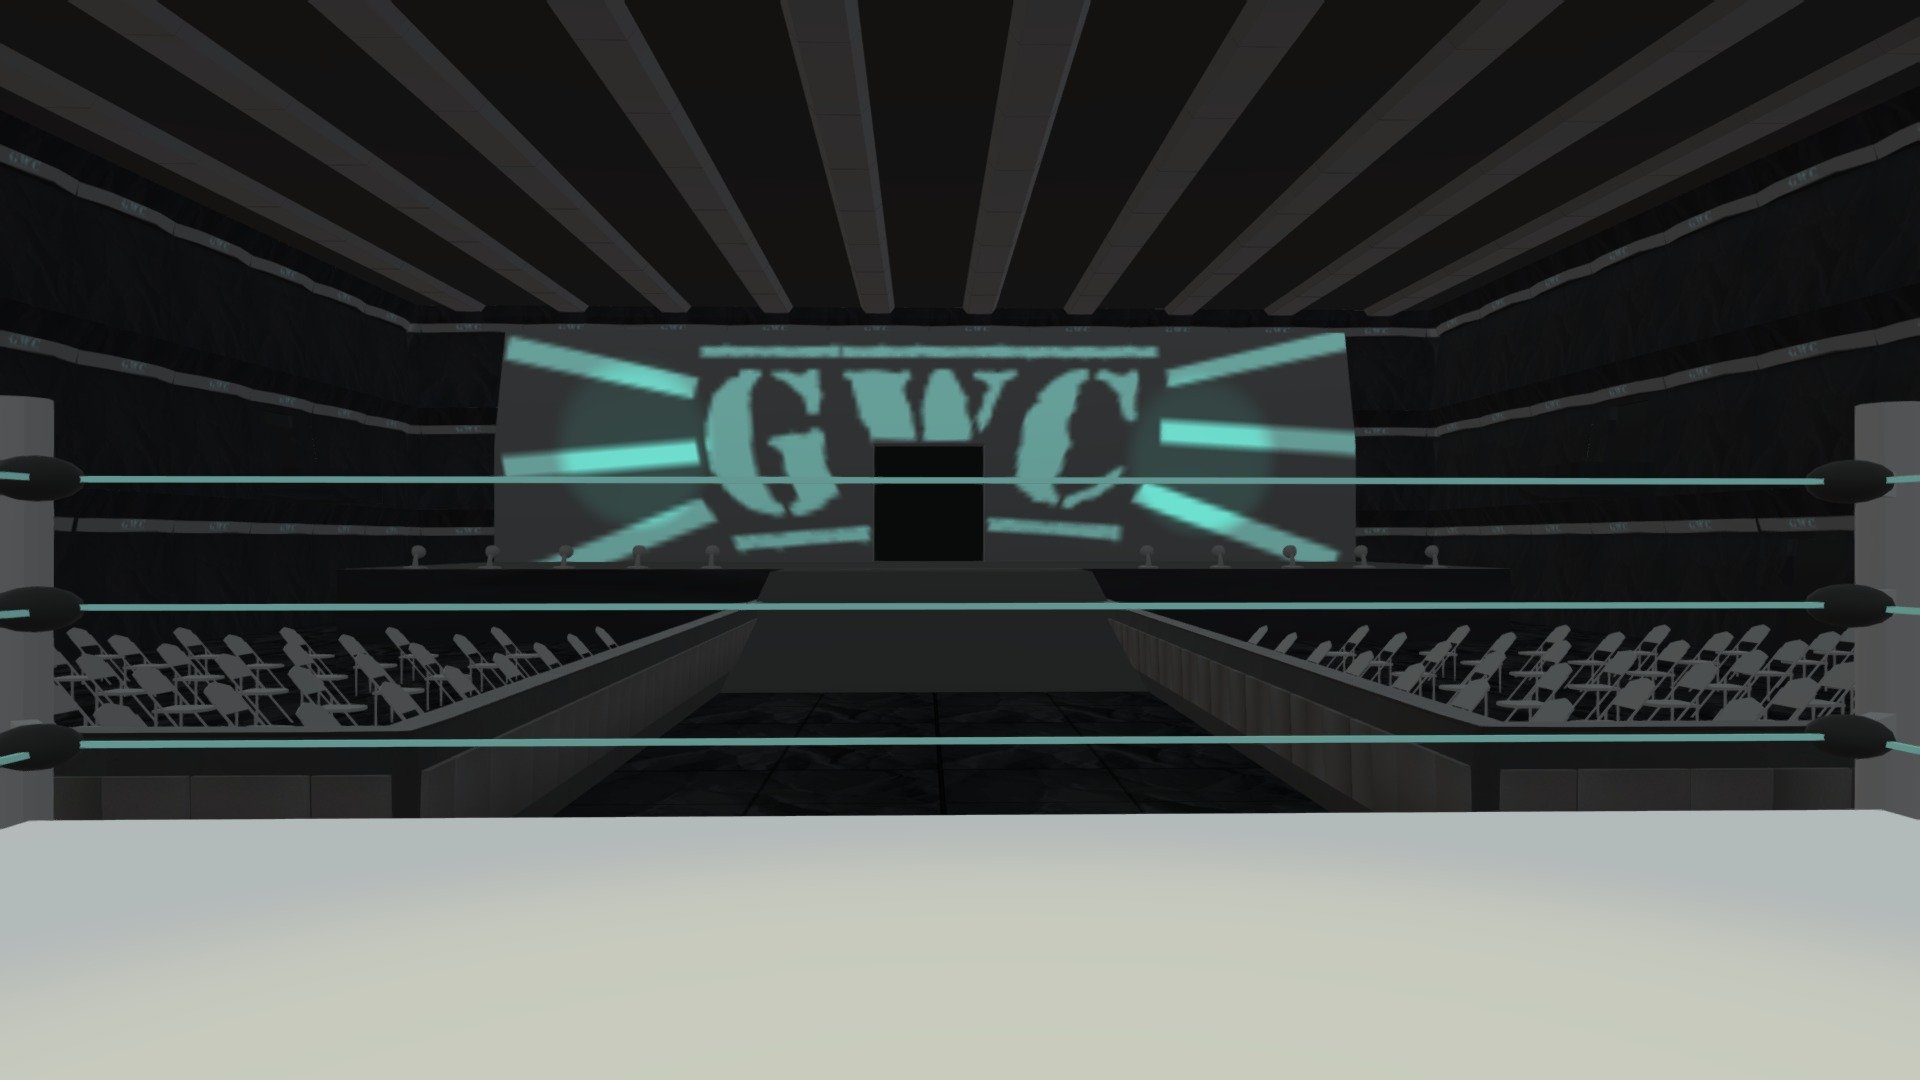 Wrestling Arena constructed out of a 4996 tri modular kit with 17 Pieces 
Modeled in Maya 
Textured in Photoshop - GWC Wrestling Arena - 3D model by Michael Davy (@Meagle13) 3d model